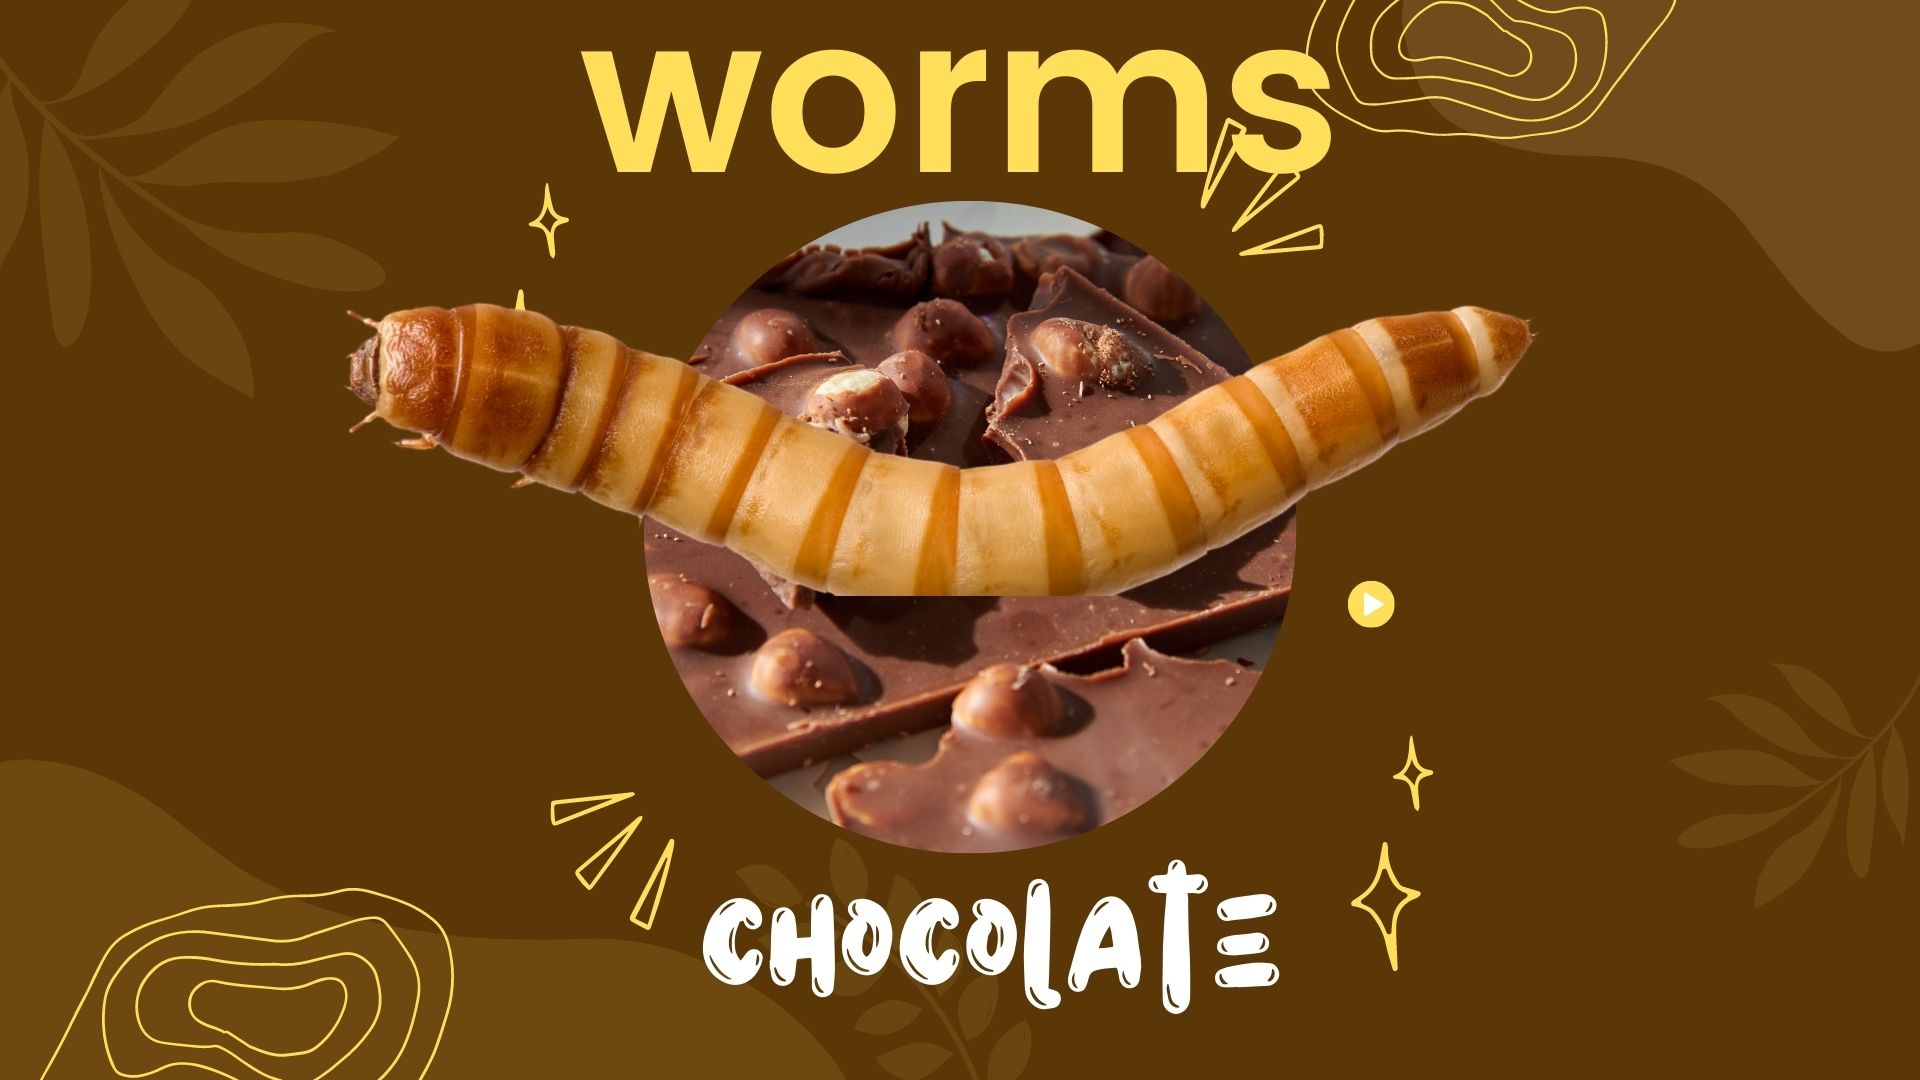 Worms in Chocolate